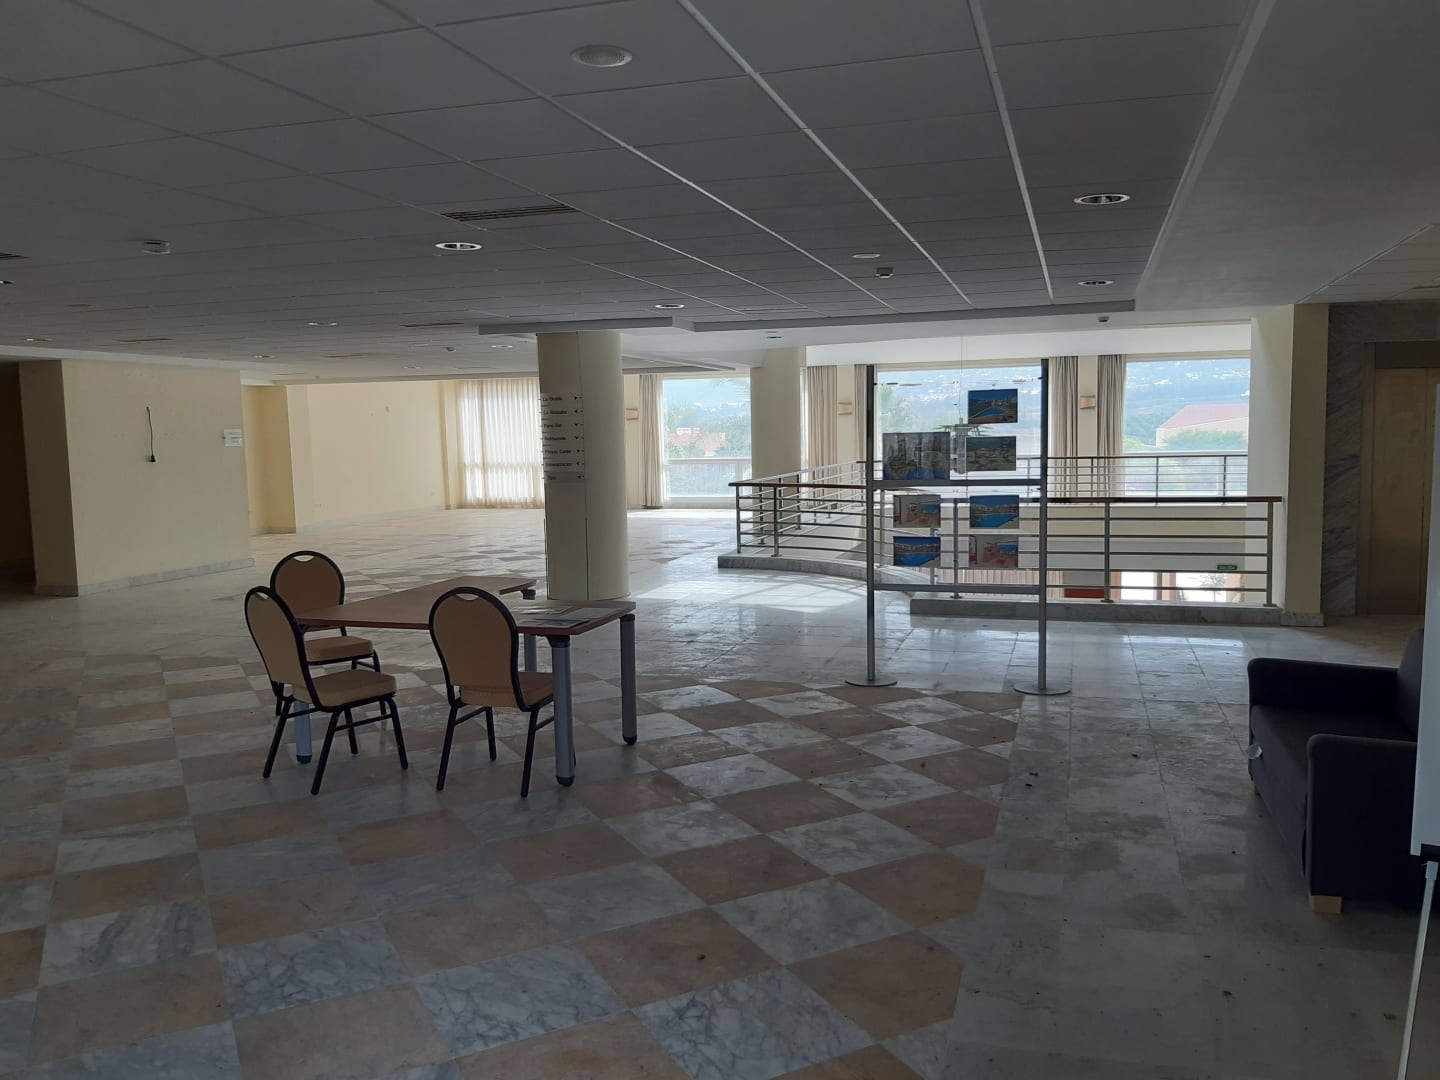 Large offices for sale, SALONS, SPA, THEATER, RESTAURANT, GARAGE SPACES in Alhaurin de la Torre